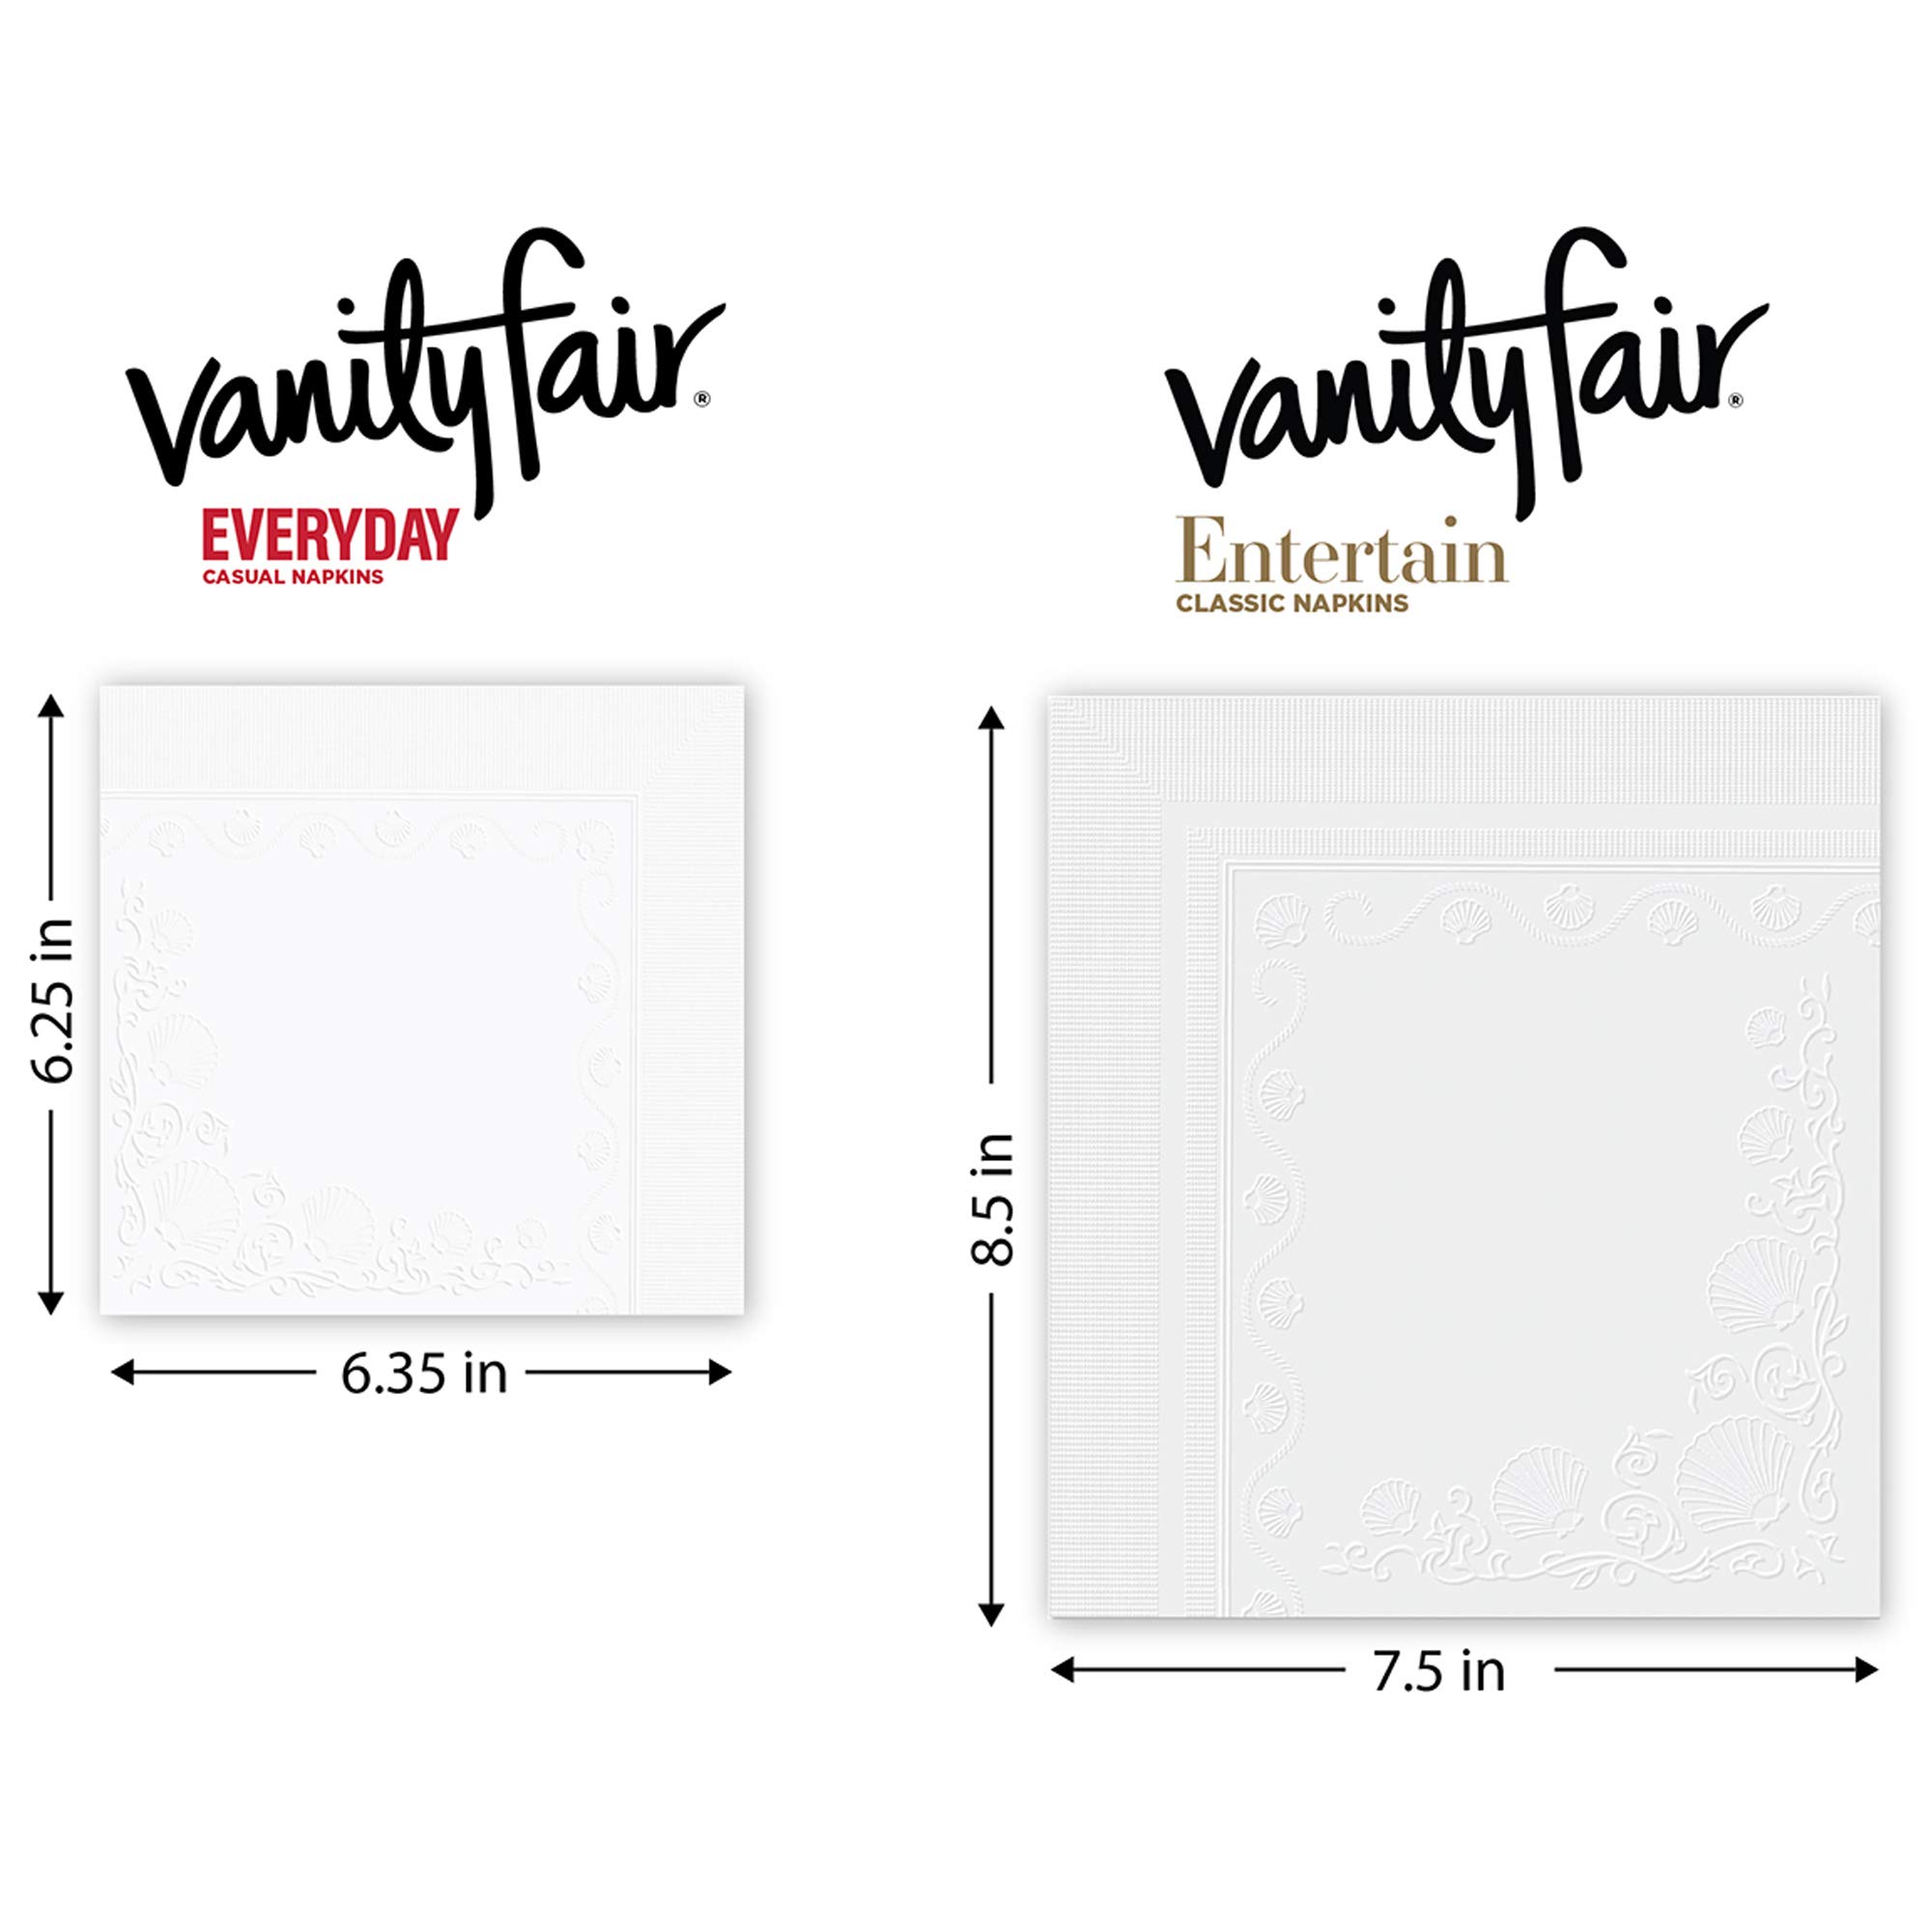 Vanity Fair Everyday Paper Napkins, 100 2-Ply Disposable Napkins